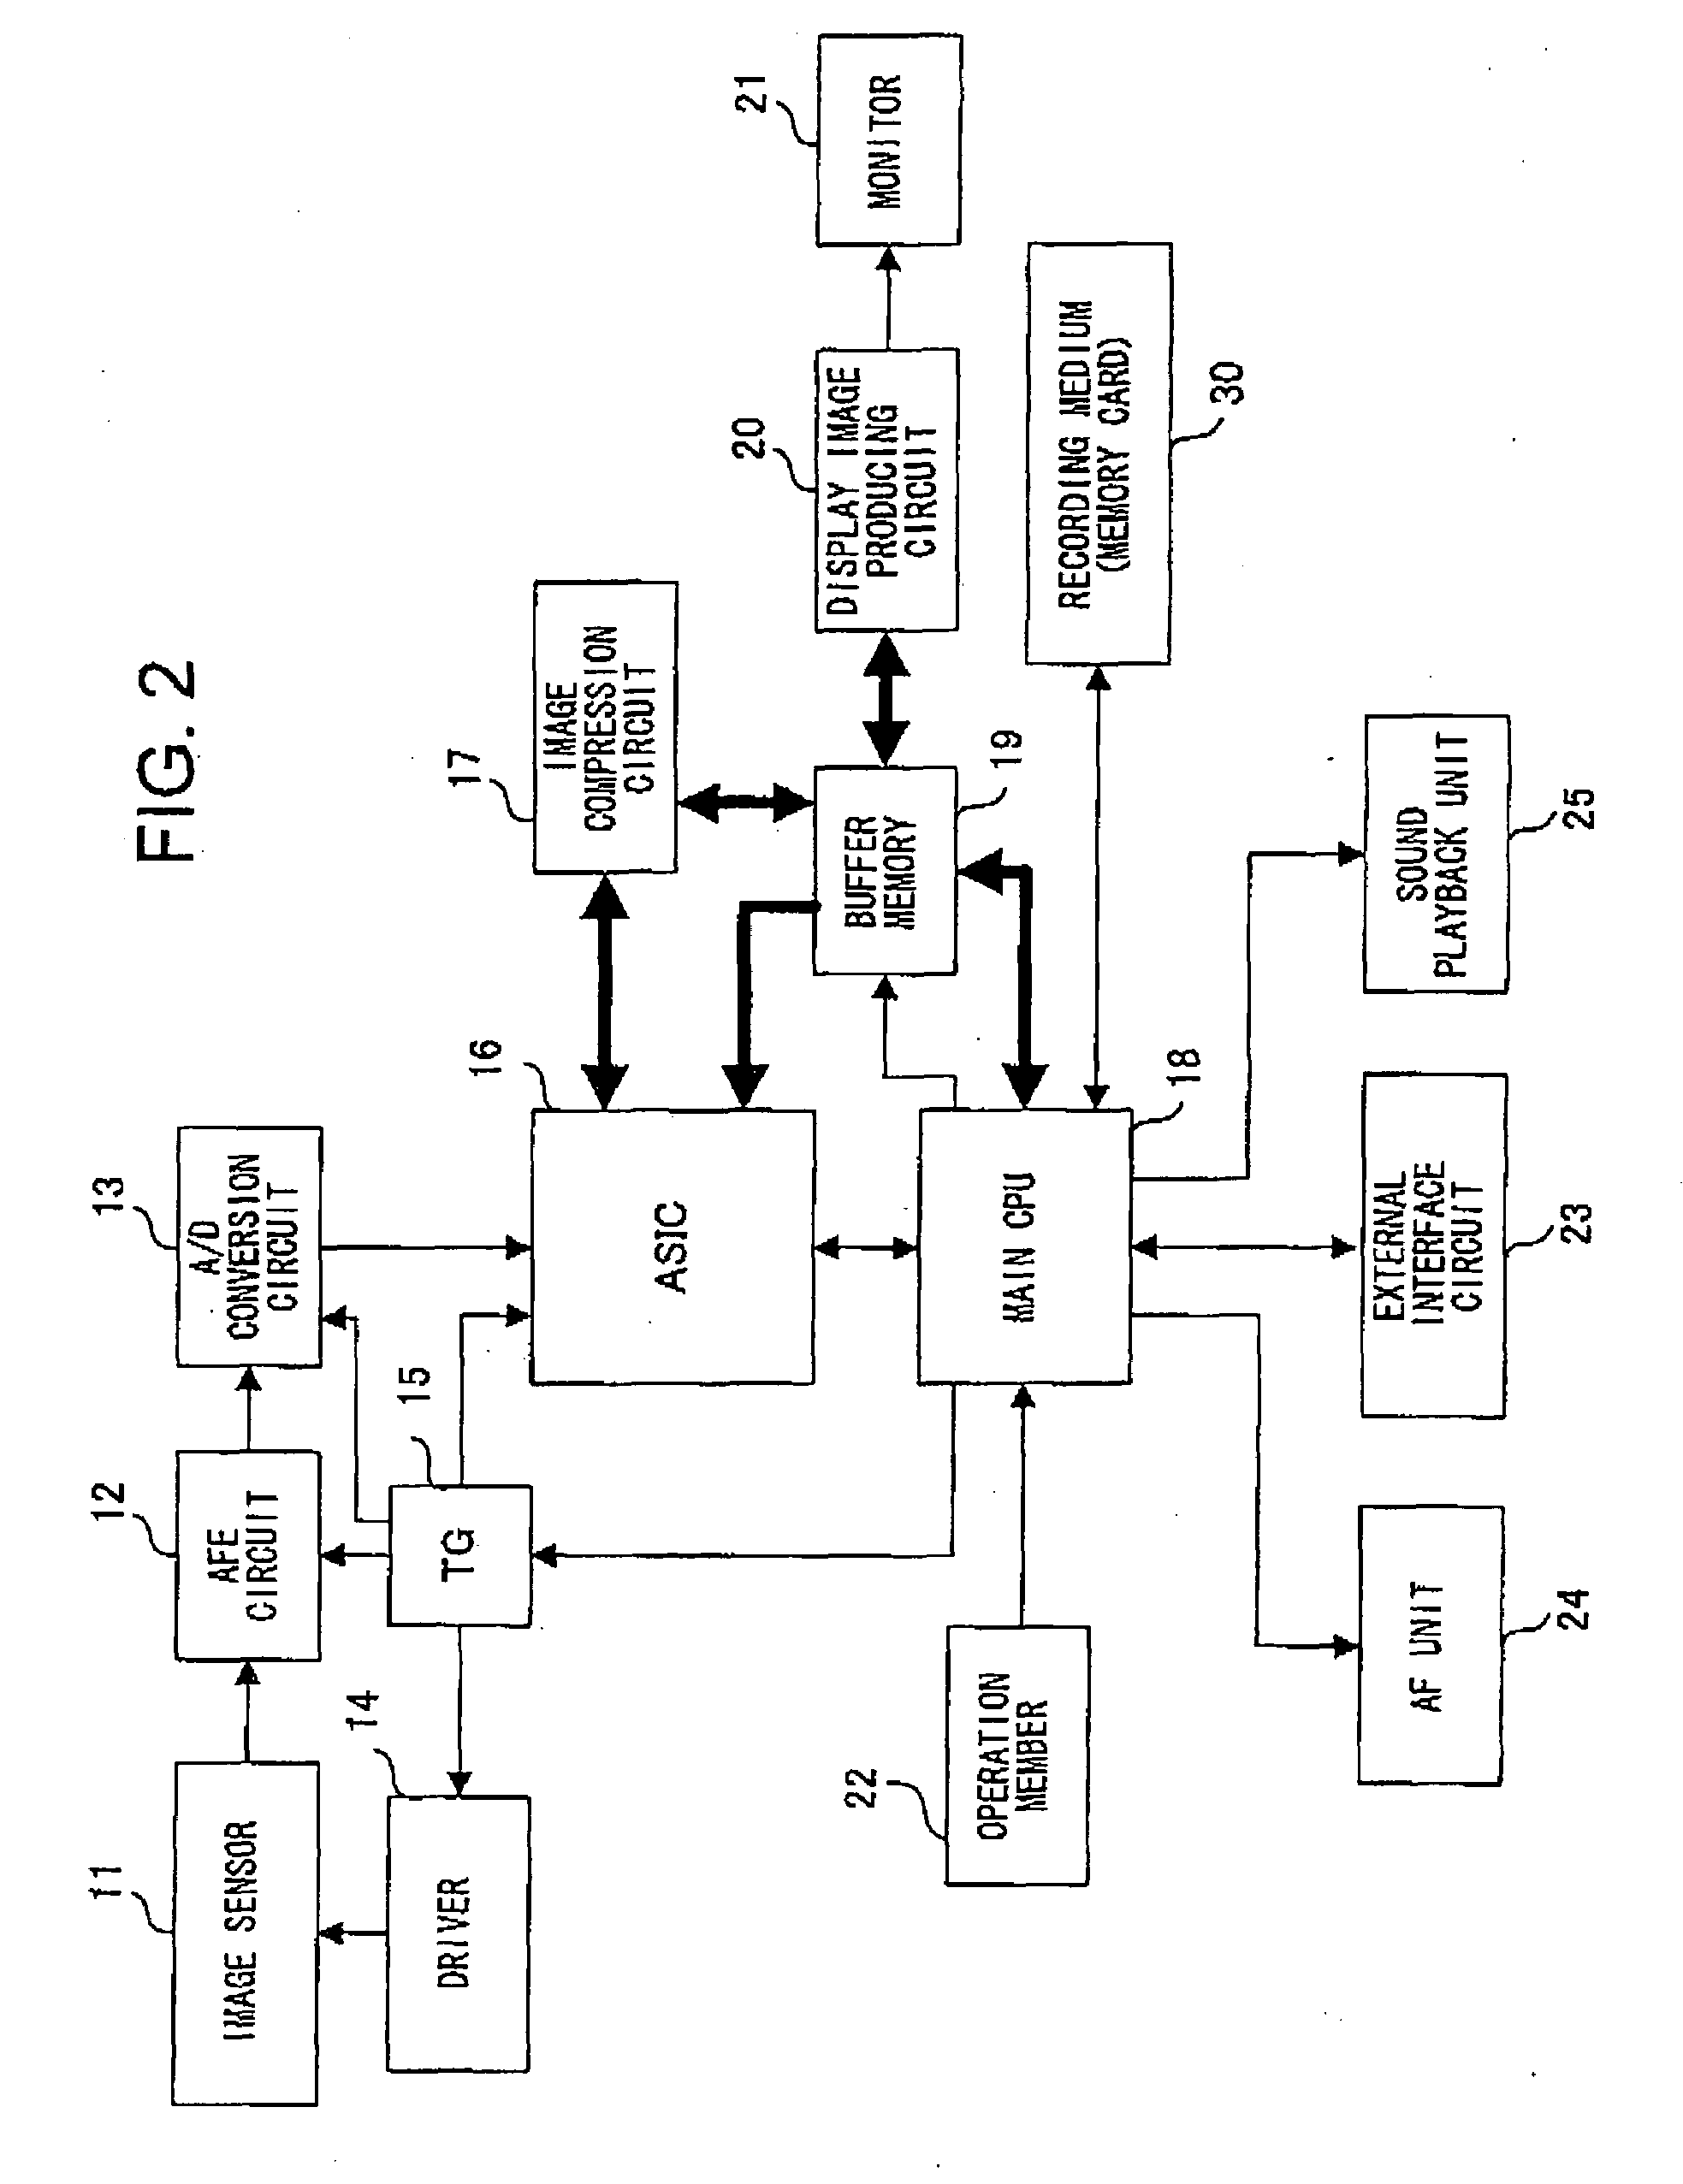 Moving image file producing method, computer program product and electronic camera